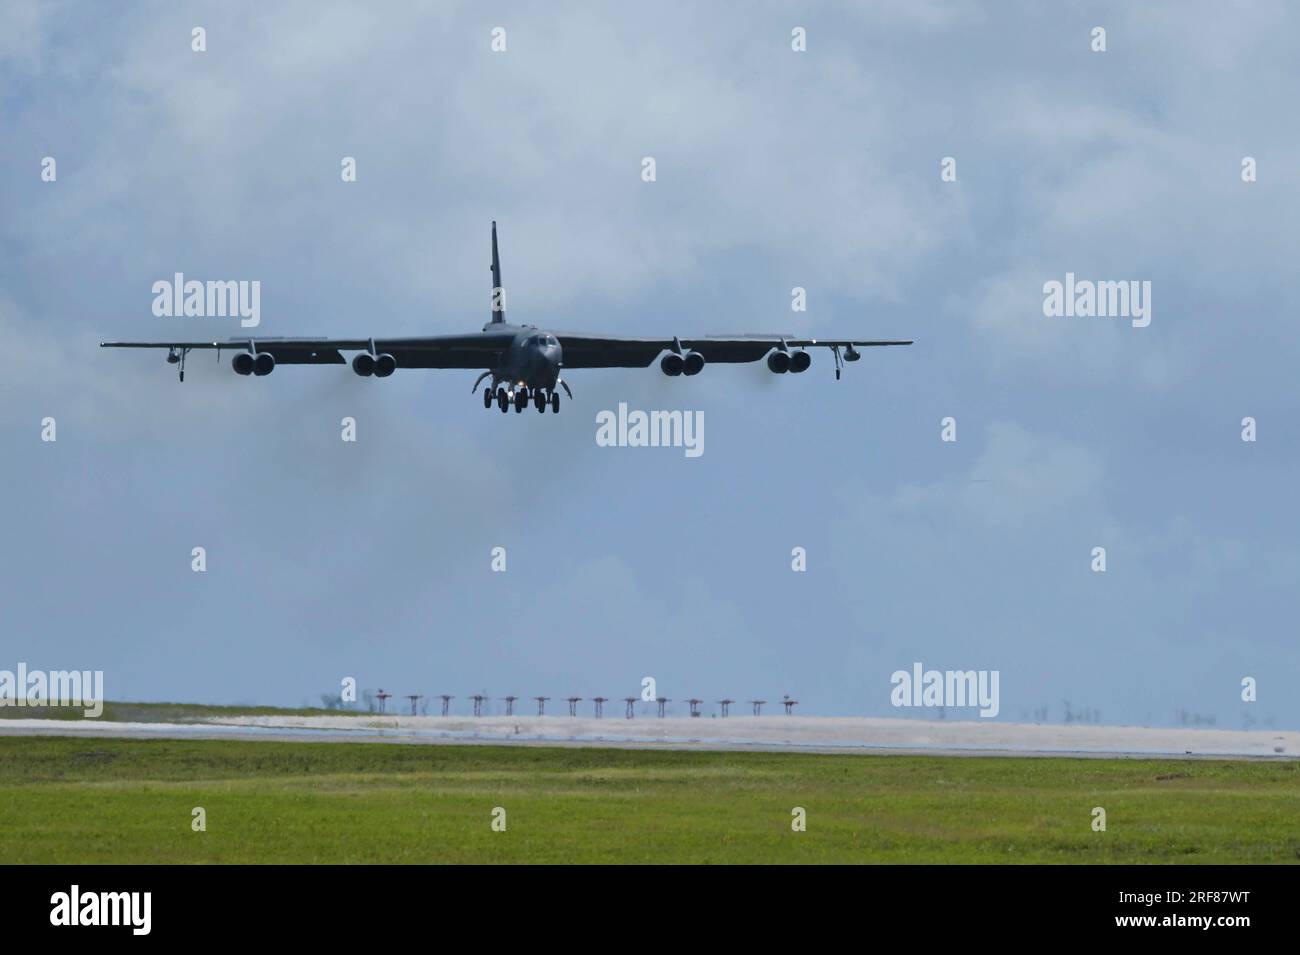 Yigo, United States. 13 July, 2023. A U.S. Air Force B-52H Stratofortress strategic bomber assigned to the 20th Expeditionary Bomb Squadron approaches to land at Andersen Air Force Base, July 14, 2023 in Yigo, Guam, USA.  Credit: A1C Nia Jacobs/U.S. Air Force Photo/Alamy Live News Stock Photo